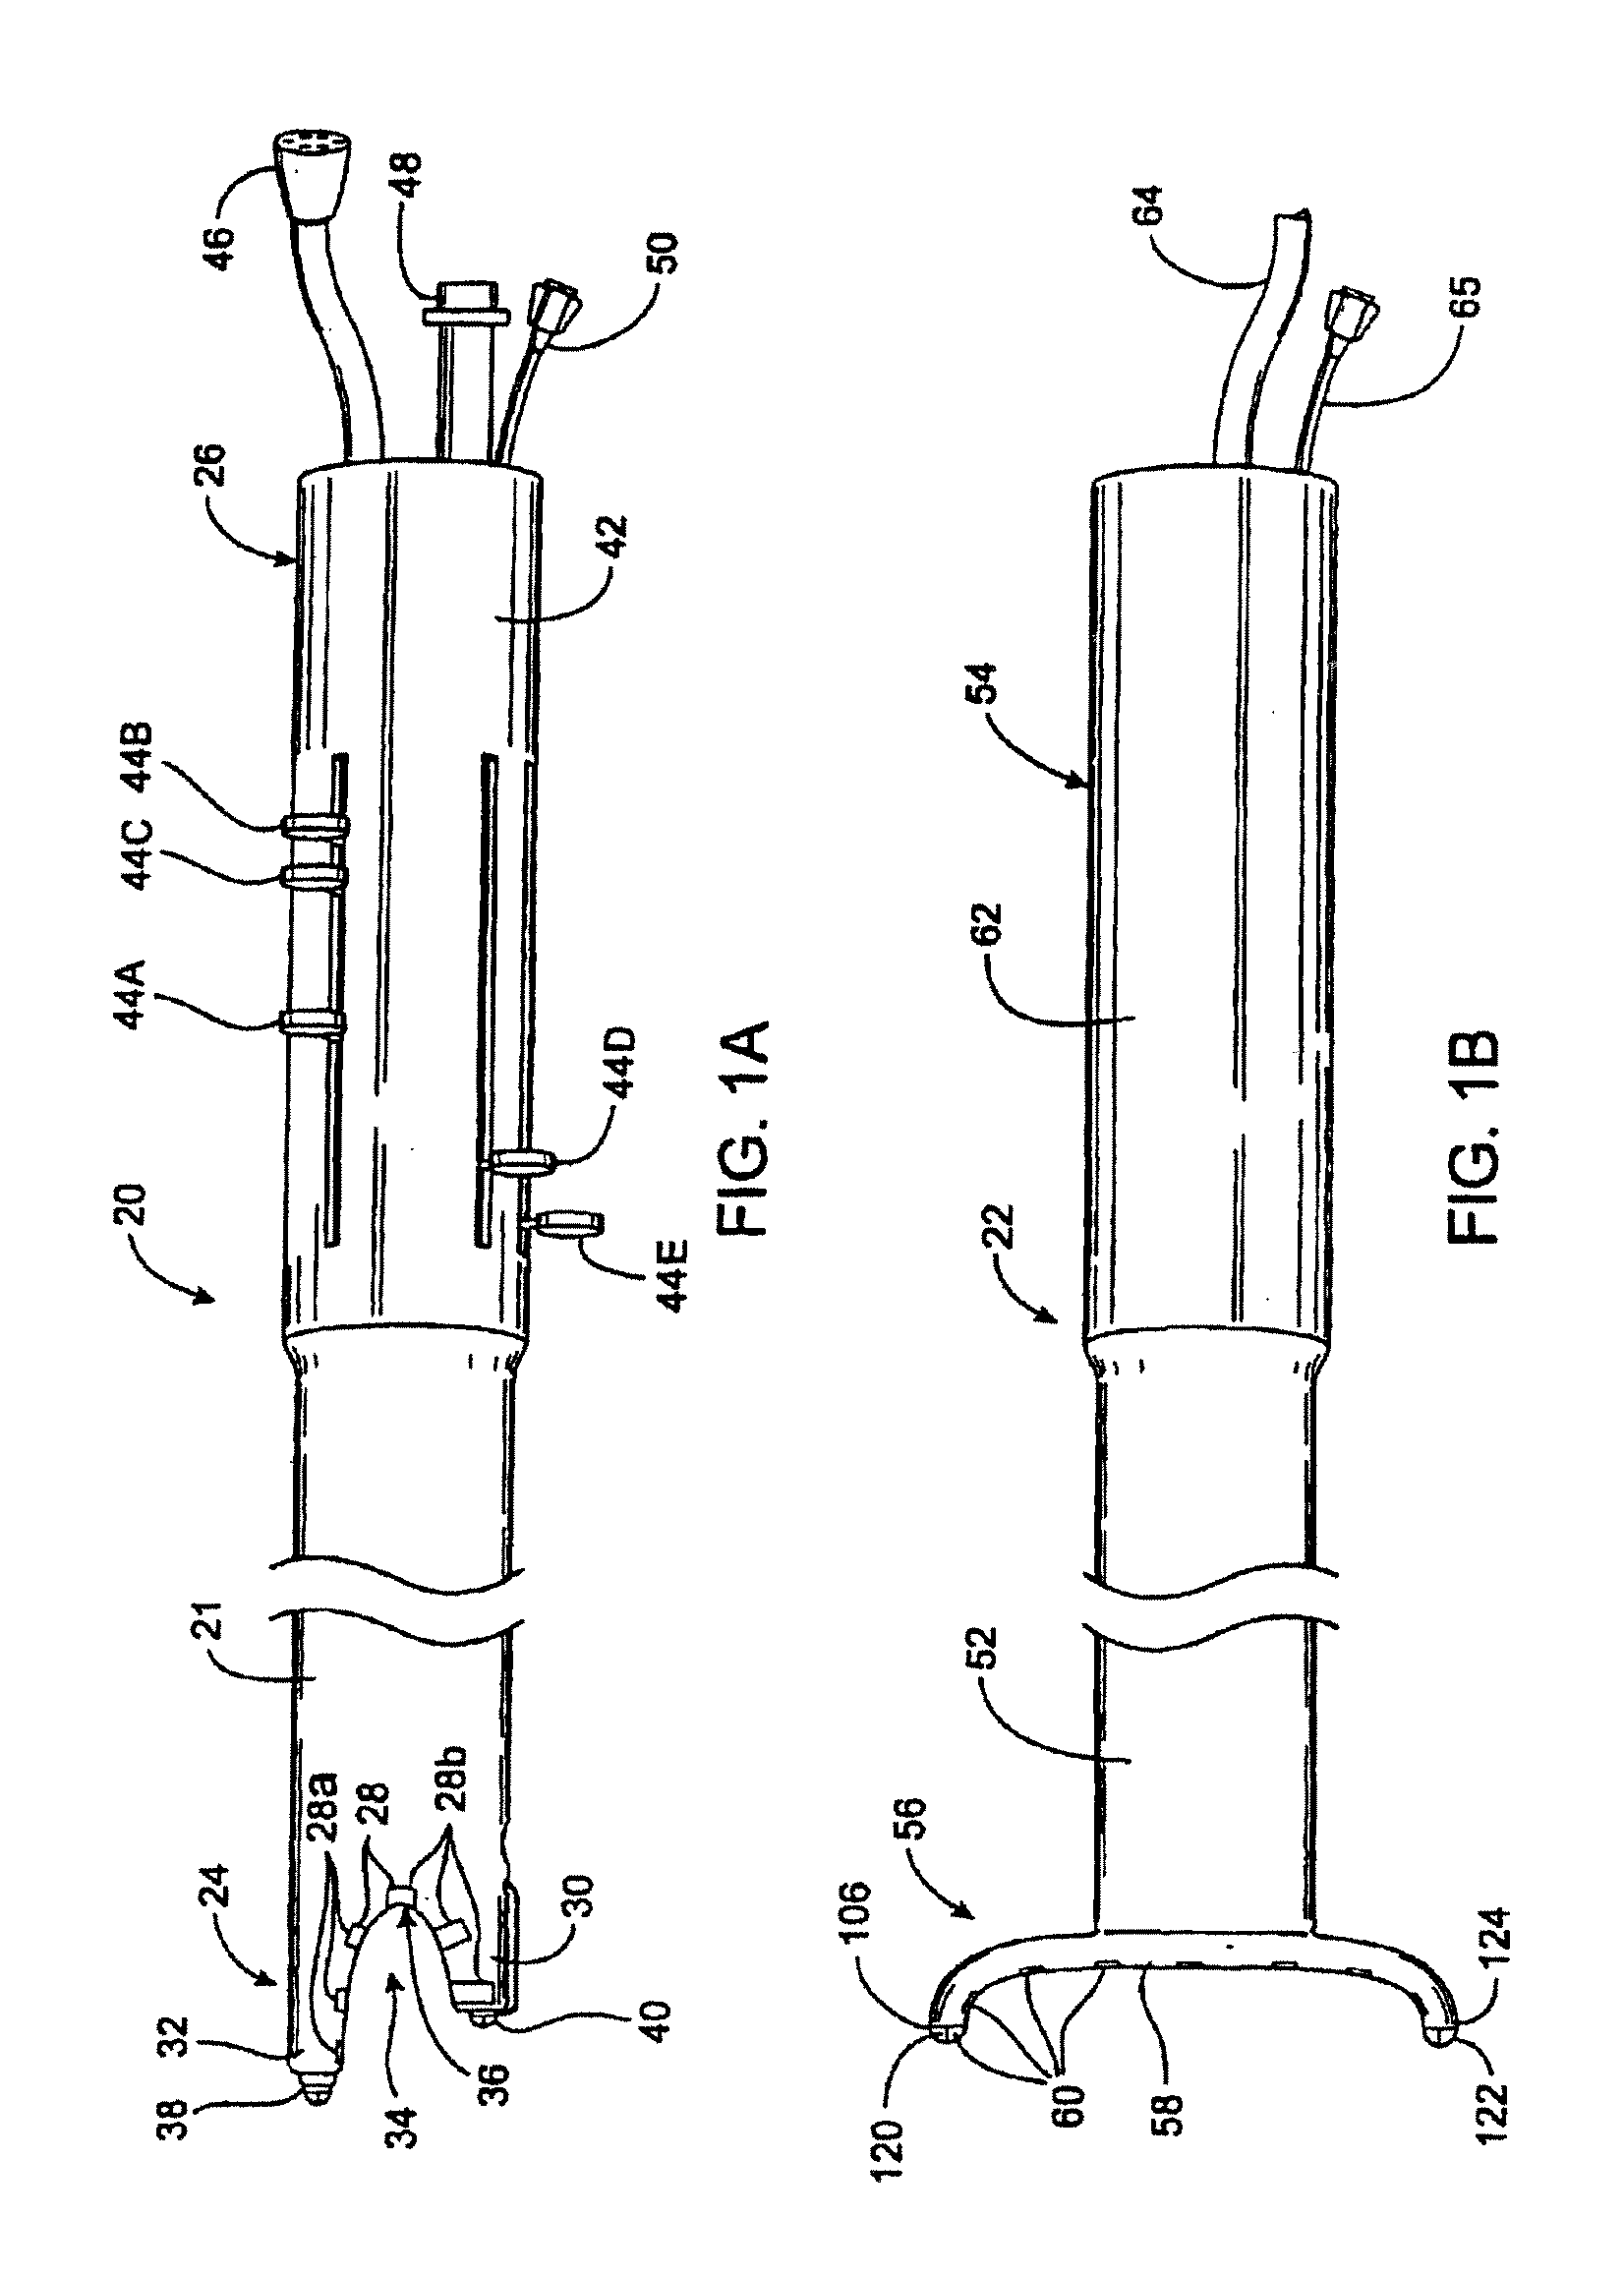 Apparatus and method for ablating tissue